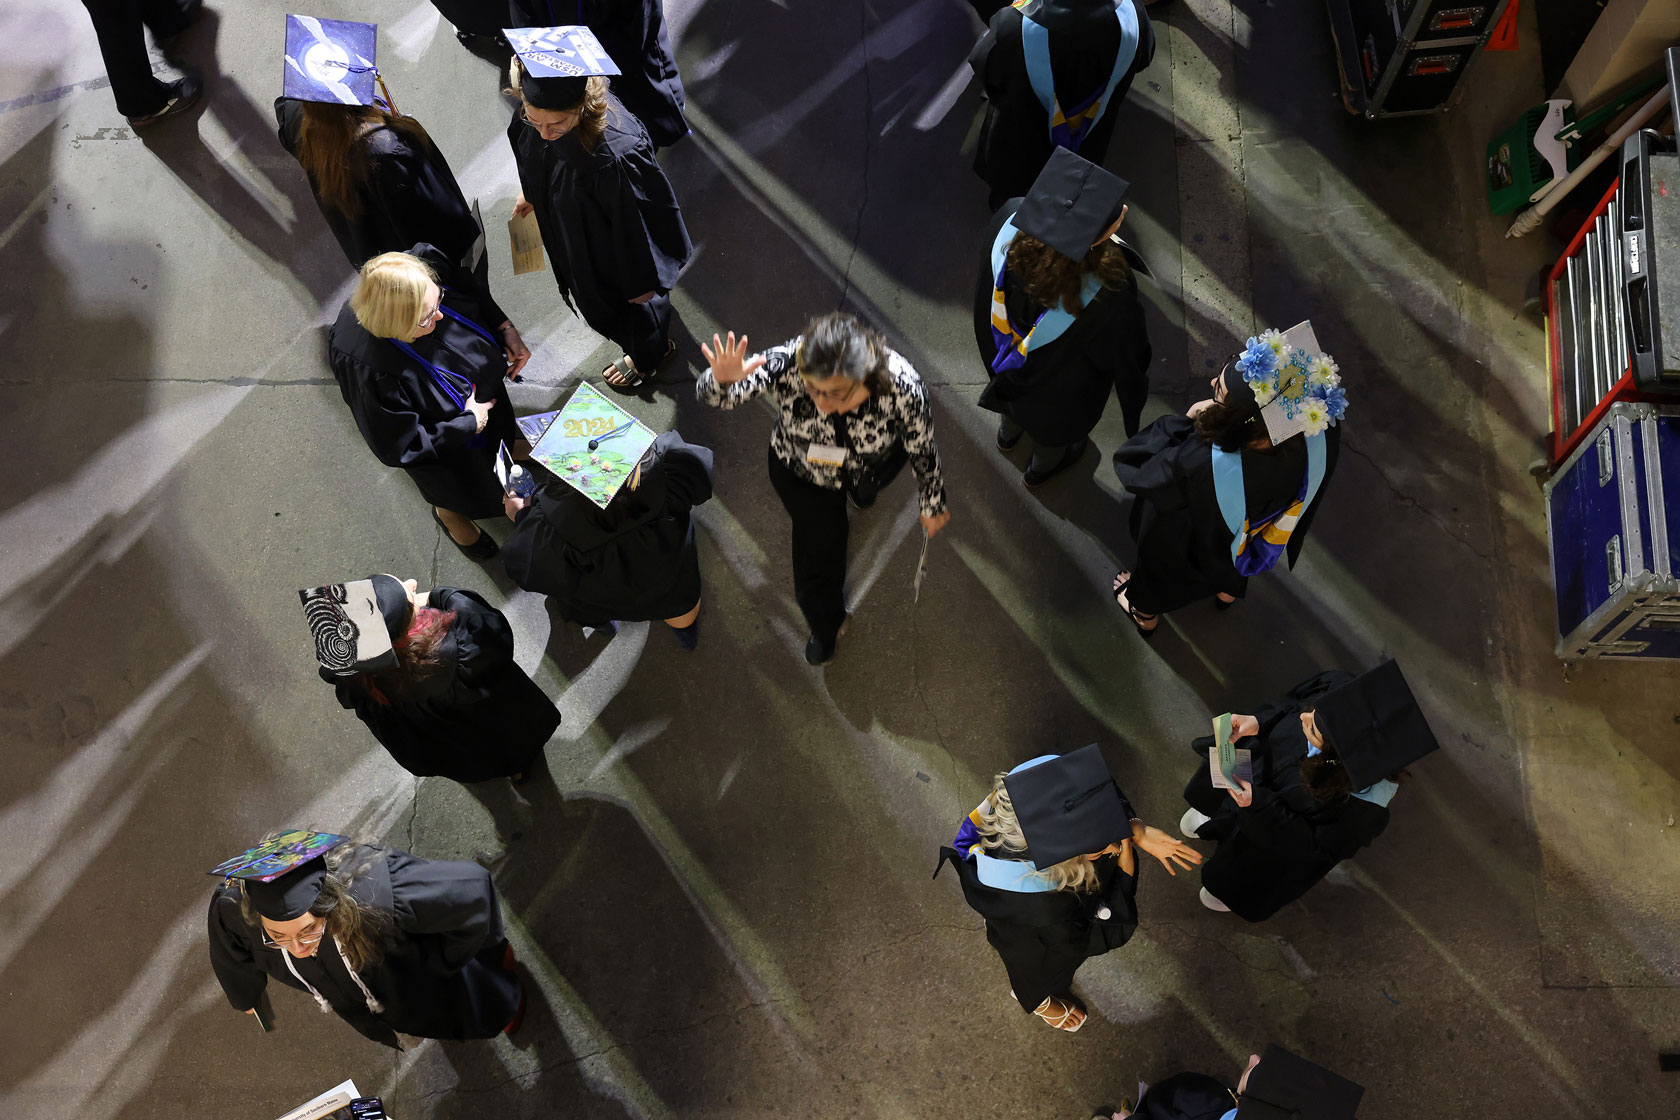 An aerial view of a volunteer with one hand raised walking through a cluster of students dressed in caps and gowns.